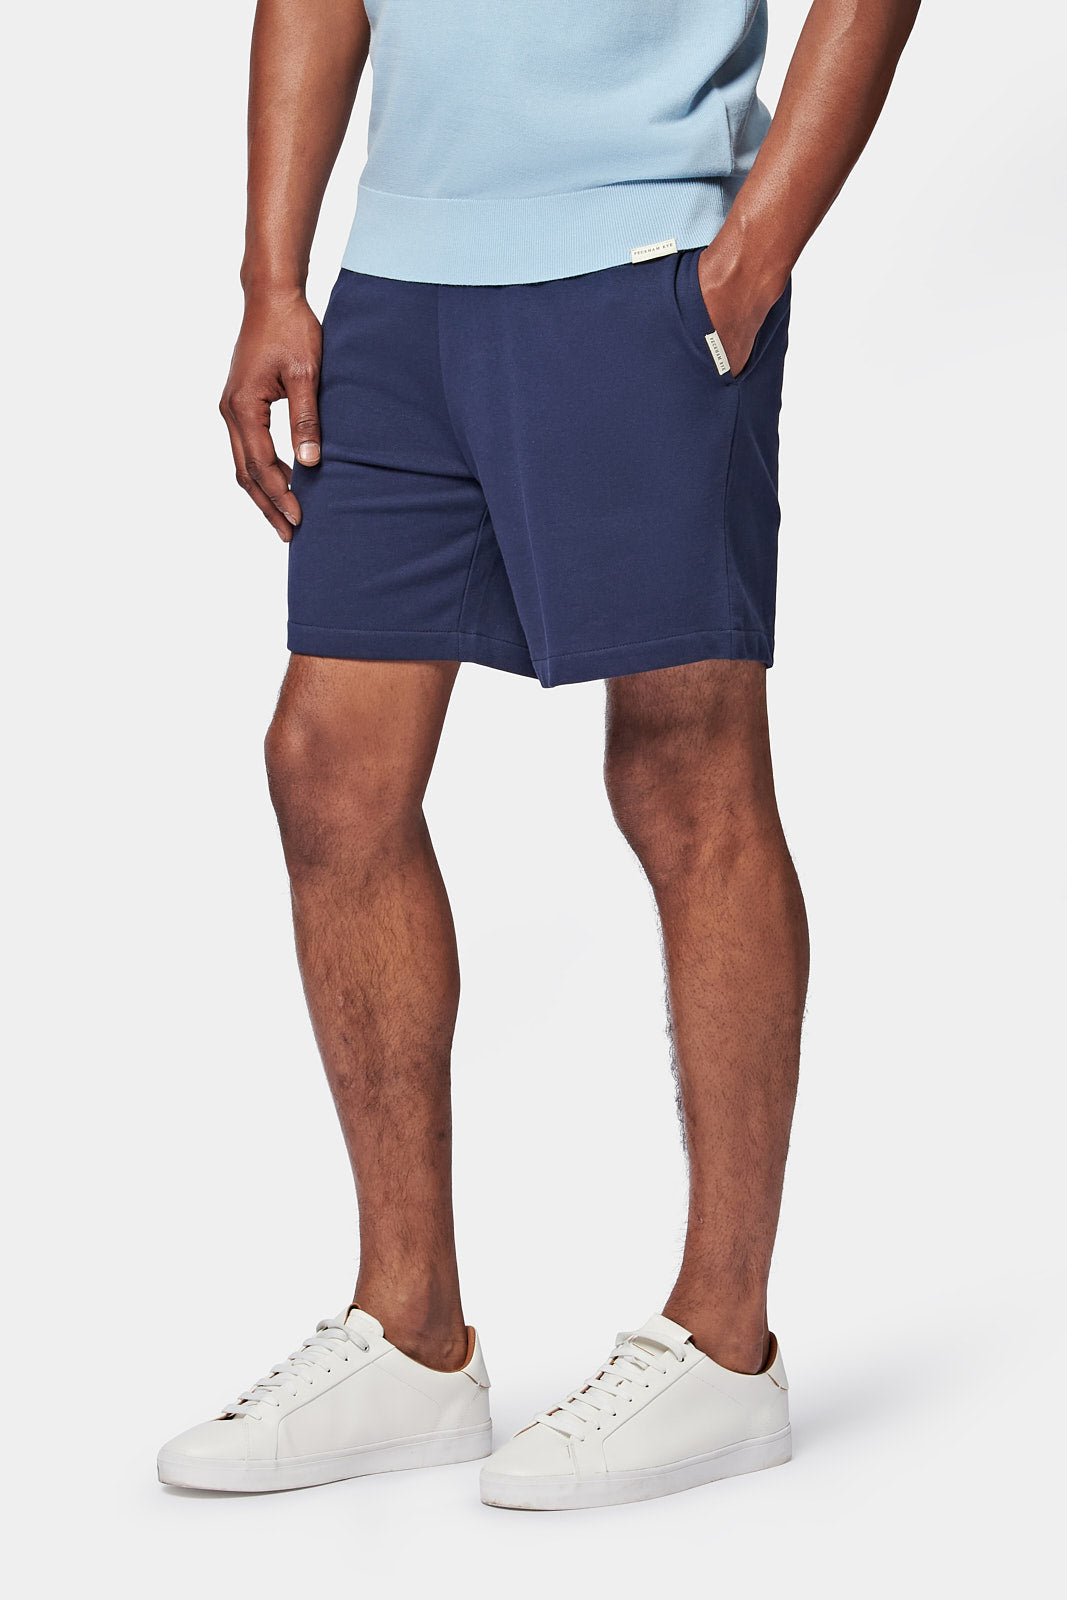 Essential French Terry Shorts in Navy Blue